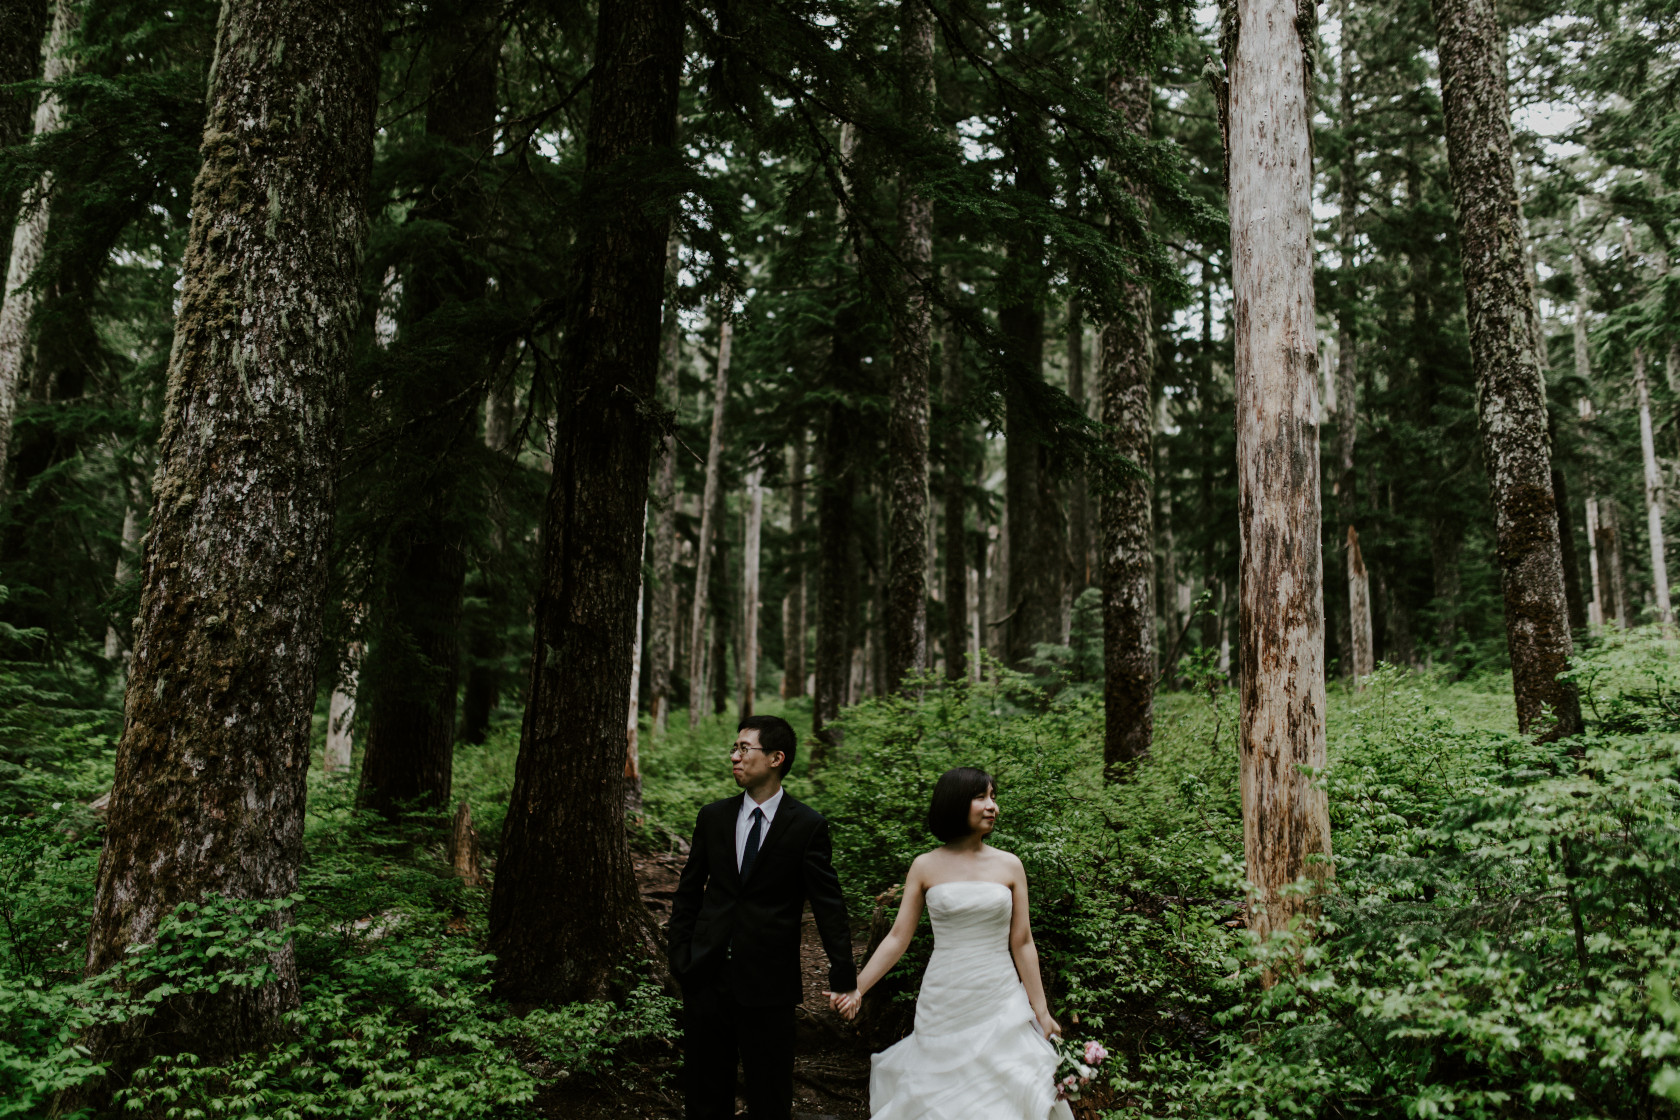 Valerie and Alex stand side by side at Mount Hood. Elopement wedding photography at Mount Hood by Sienna Plus Josh.